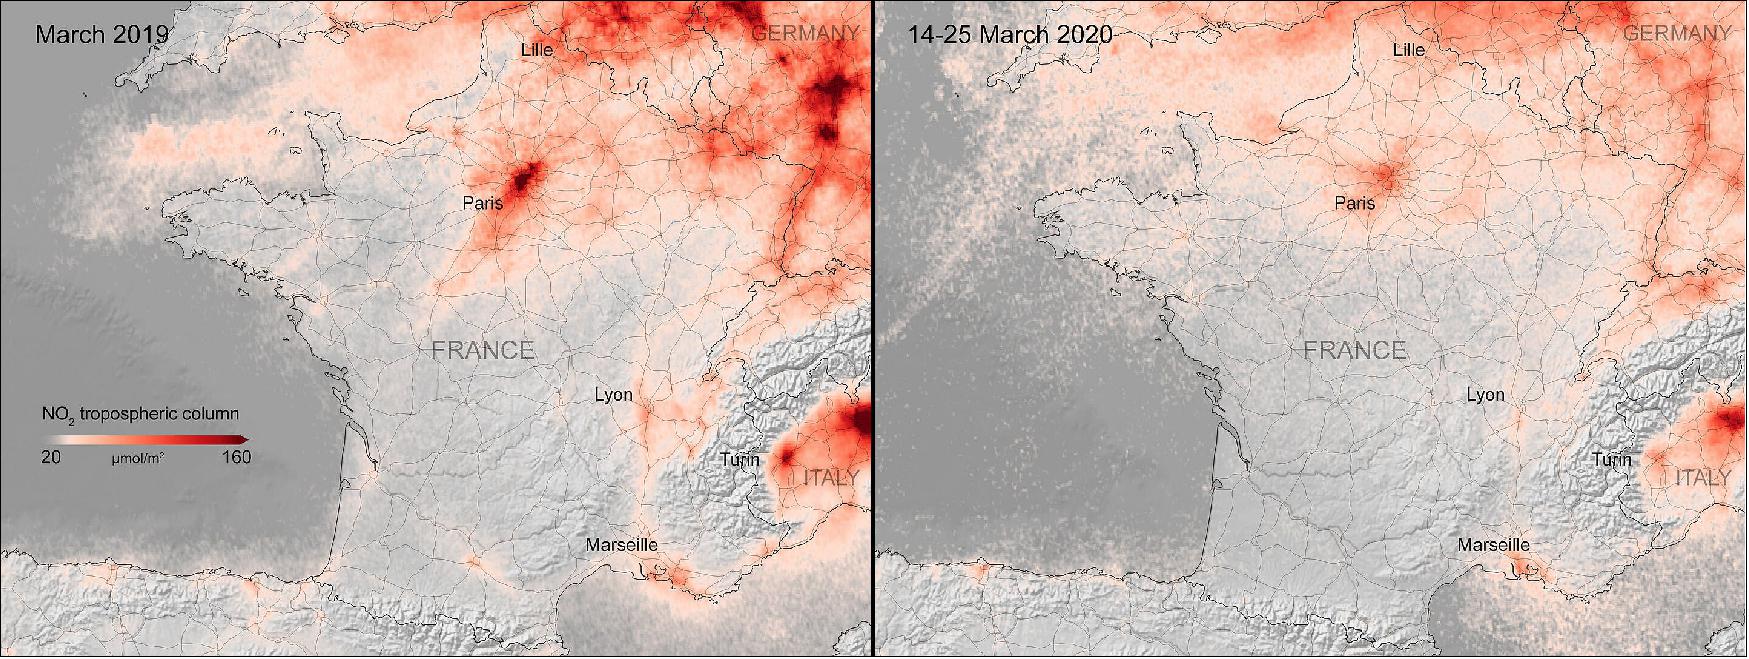 Figure 78: Nitrogen dioxide concentrations over France. These images, using data from the Copernicus Sentinel-5P satellite, show the average nitrogen dioxide concentrations from 14 to 25 March 2020 (right), compared to the monthly average concentrations from 2019 (left), image credit: ESA, the images contain modified Copernicus Sentinel data (2019-20), processed by KNMI/ESA, CC BY-SA 3.0 IGO